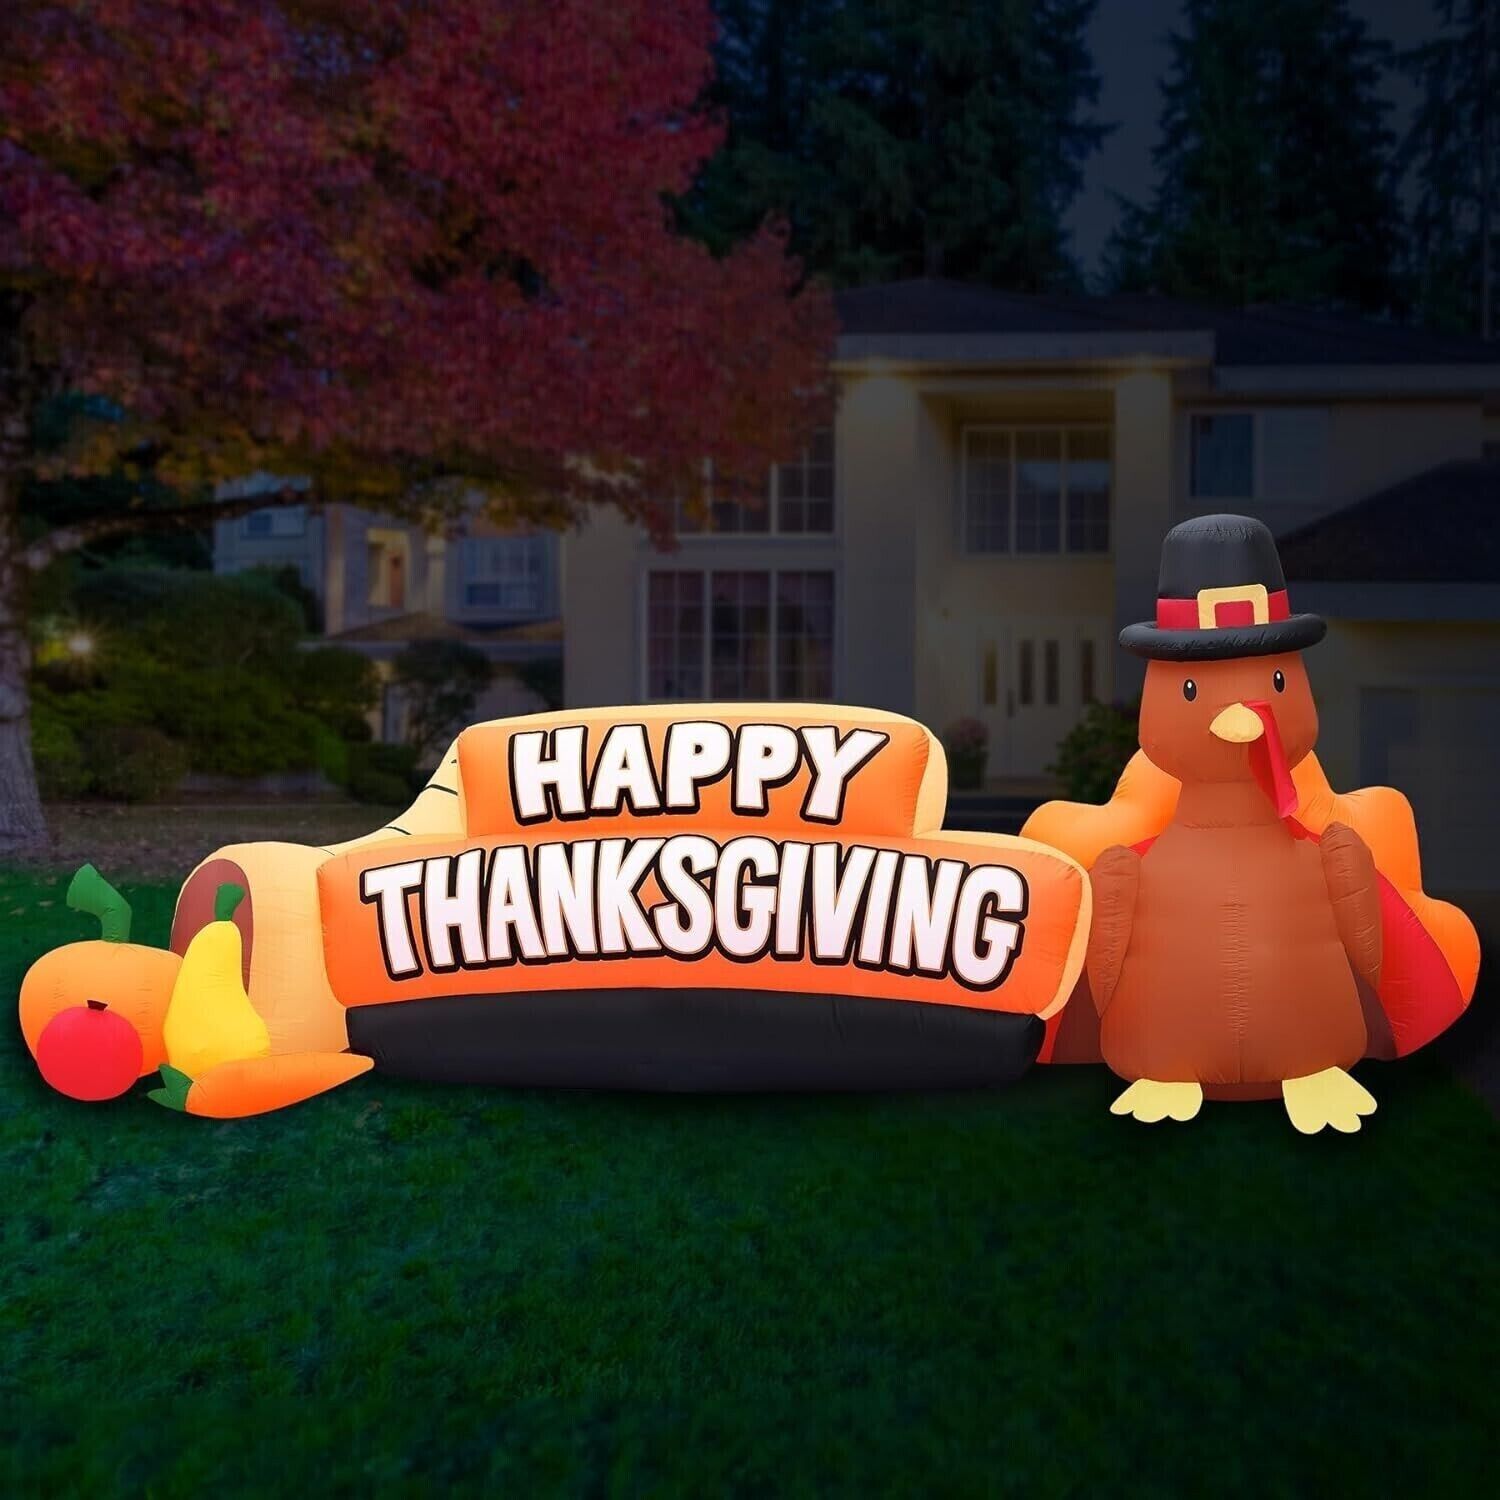 Happy Thanksgiving Inflatable Turkey YARD DECOR 10.5'/ NO STEAKS OR ROPES/TESTED